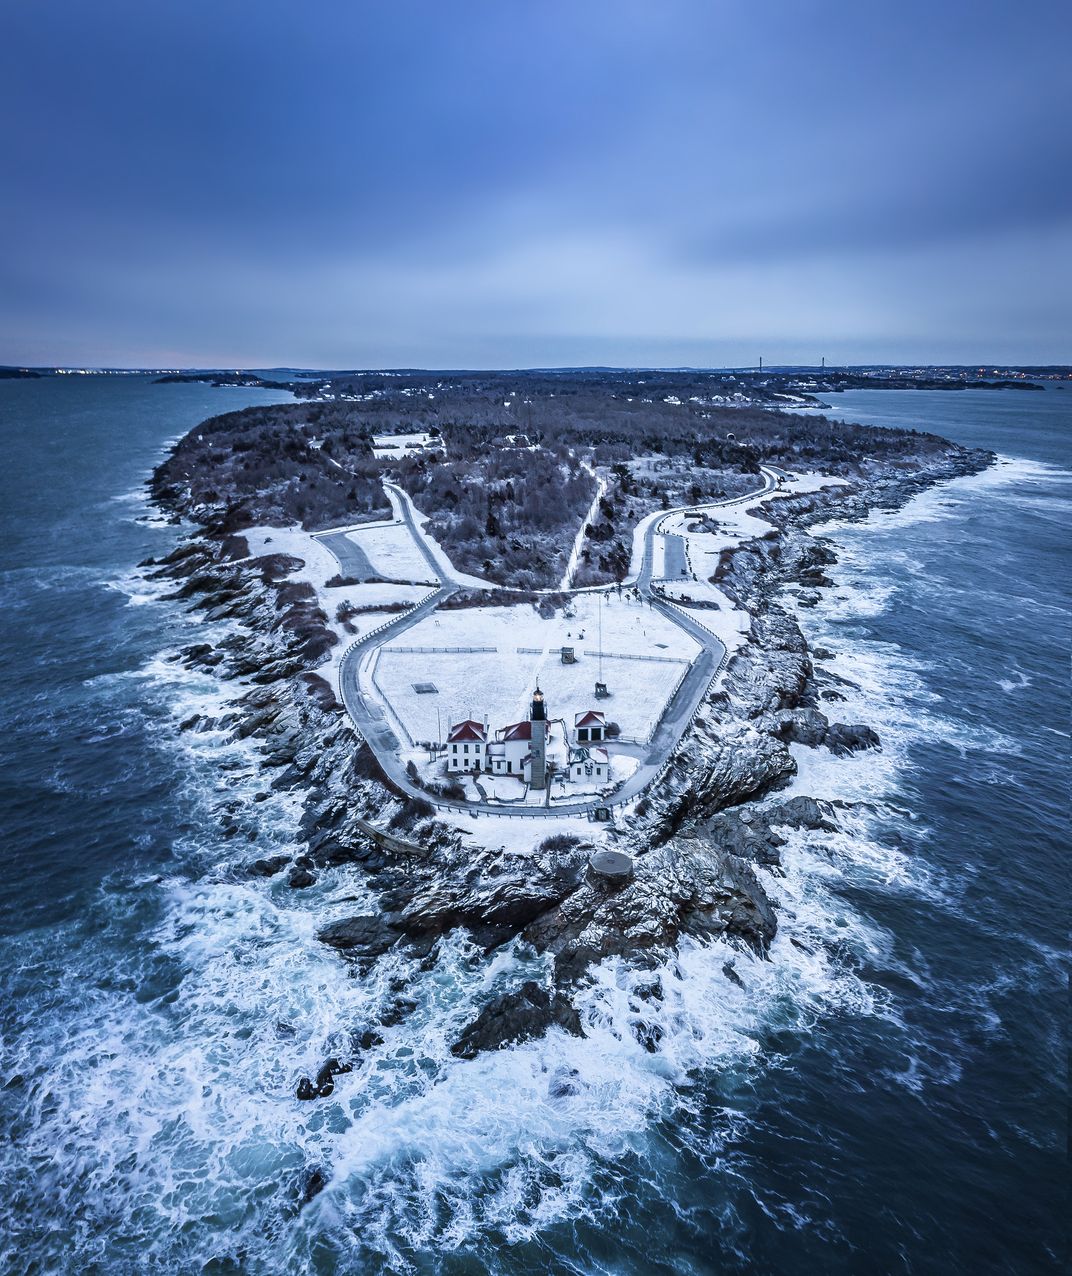 10 - Snow covers the grounds of Beavertail Lighthouse, which sits at the end of Conanicut Island on Narragansett Bay.